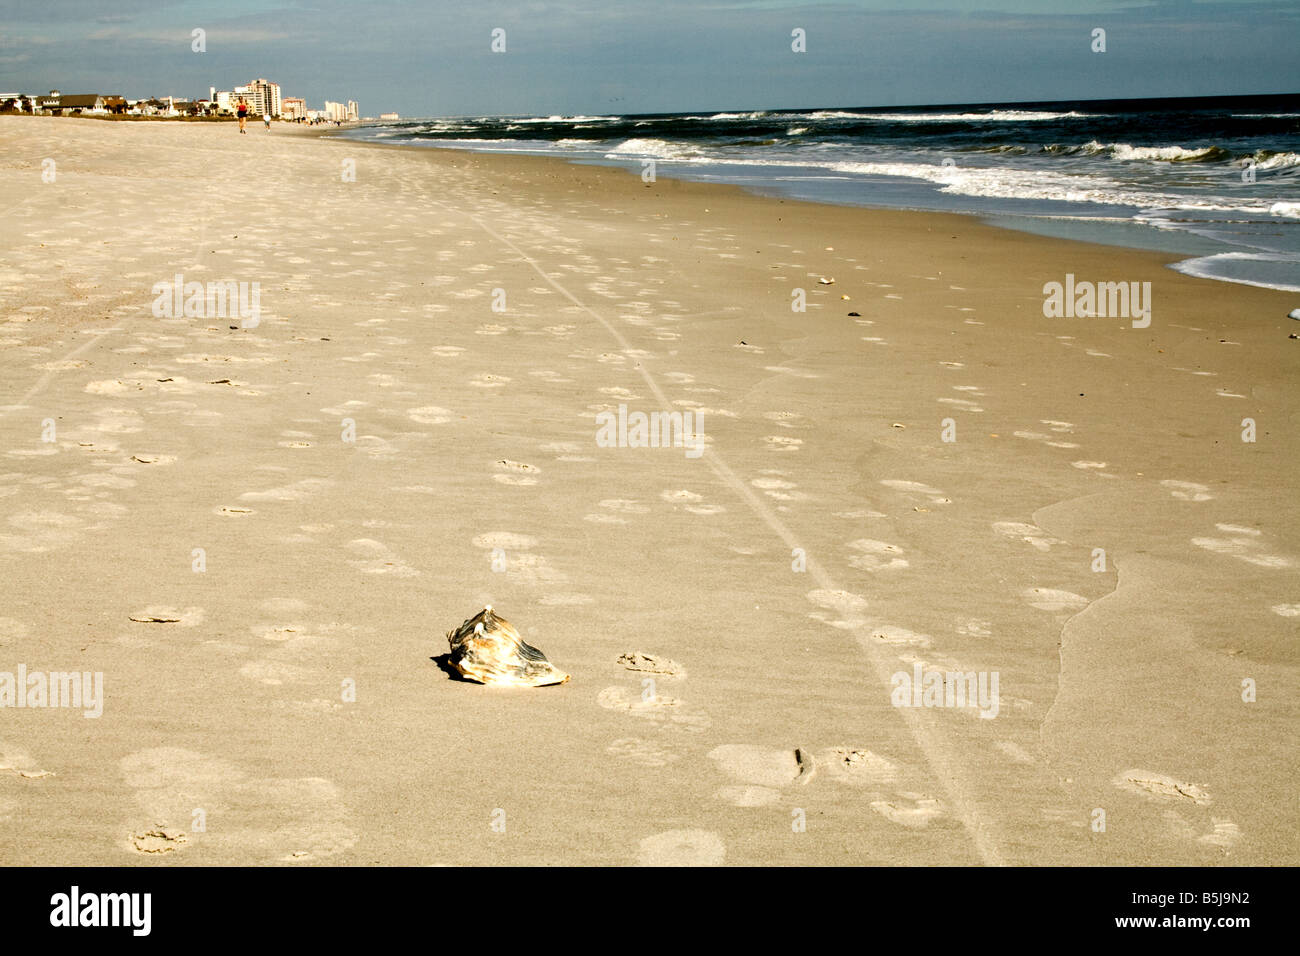 Lone conch shell on the beach amid footprints and bicycle tire tracks in Jacksonville Beach, Florida Stock Photo